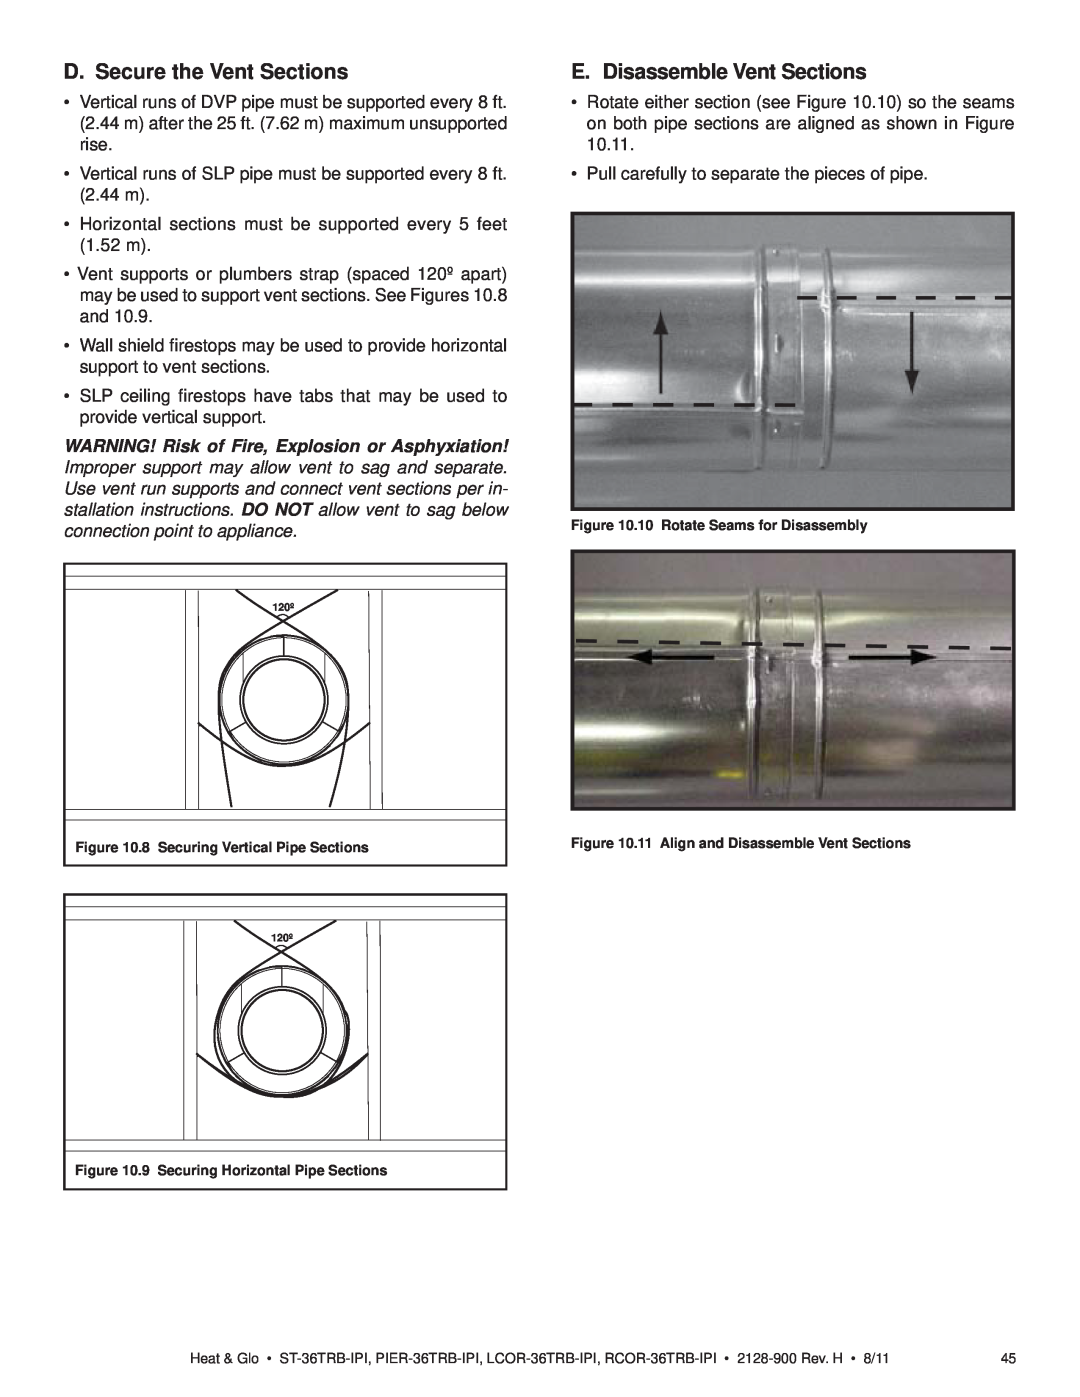 Heat & Glo LifeStyle ST-36TRB-IPI owner manual D. Secure the Vent Sections, E. Disassemble Vent Sections 